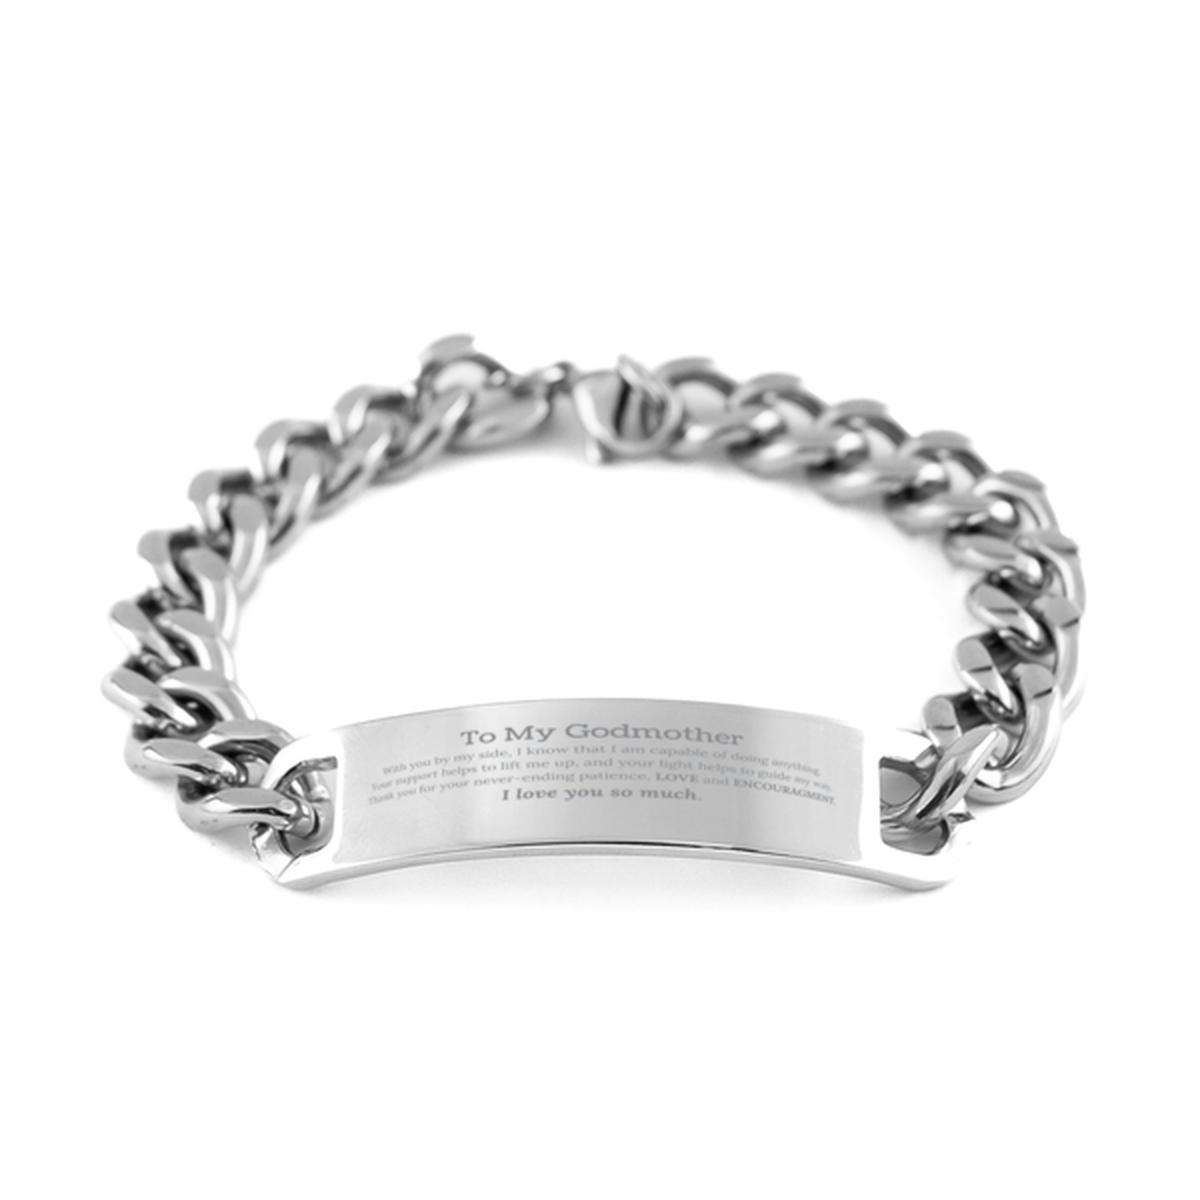 Appreciation Godmother Cuban Chain Stainless Steel Bracelet Gifts, To My Godmother Birthday Christmas Wedding Keepsake Gifts for Godmother With you by my side, I know that I am capable of doing anything. I love you so much